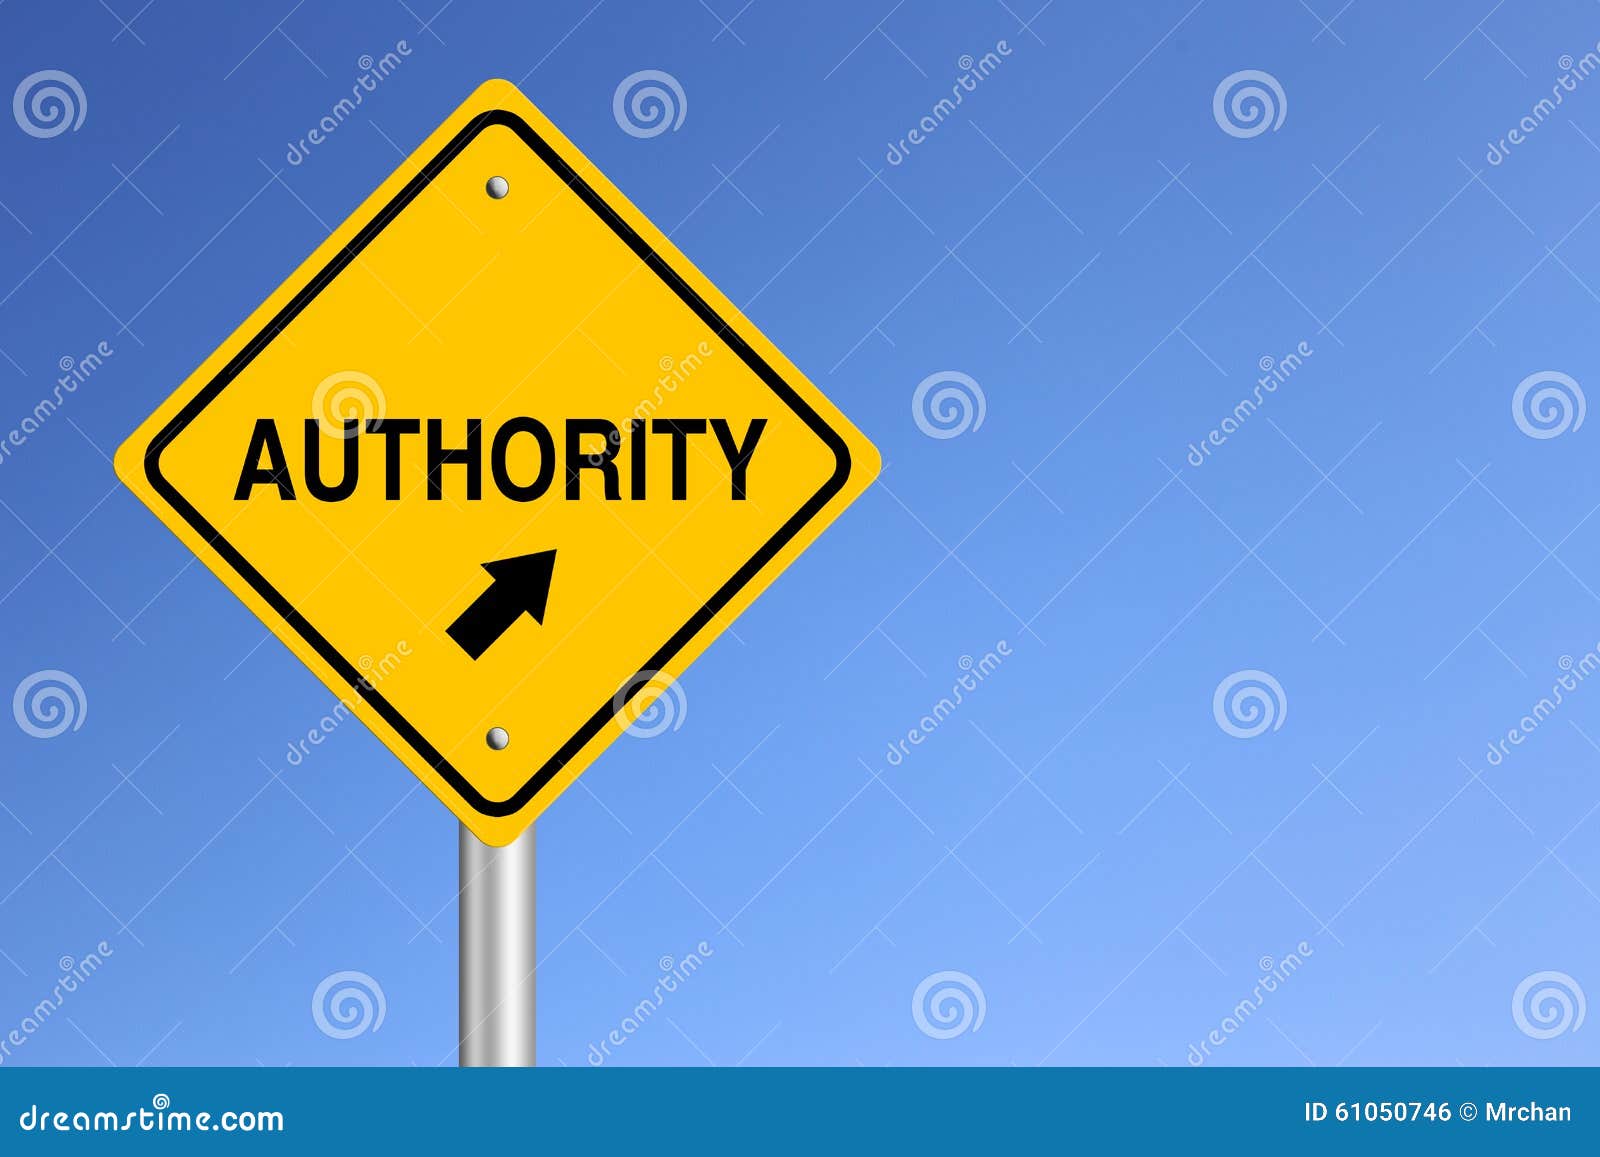 authority road sign